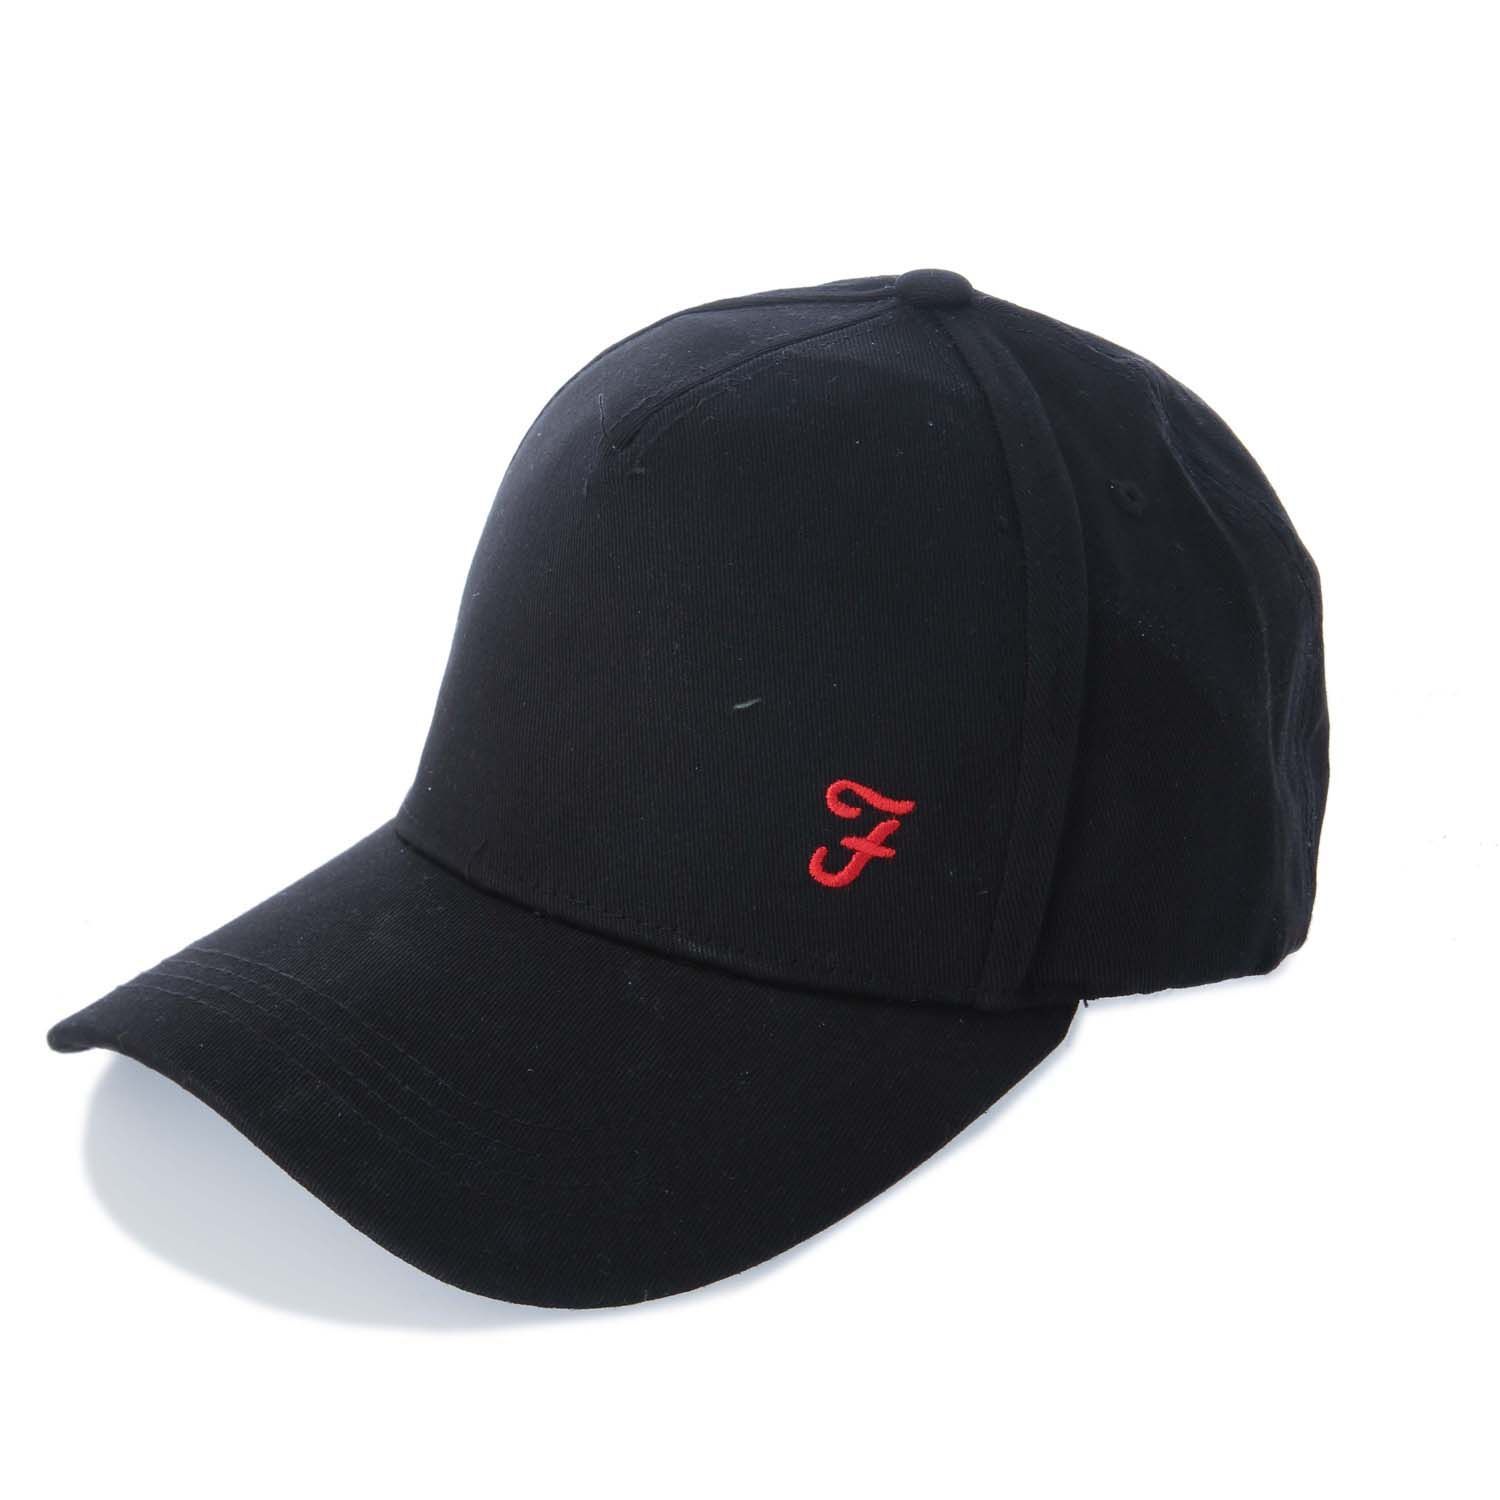 Mens Farah Monza Classic Cap in black.- Adjustable back strap.- Full crown with six panels.- Adjustable back strap.- Embroidered branding.- 100% Cotton. Machine washable.- Ref: AW21FAROP009